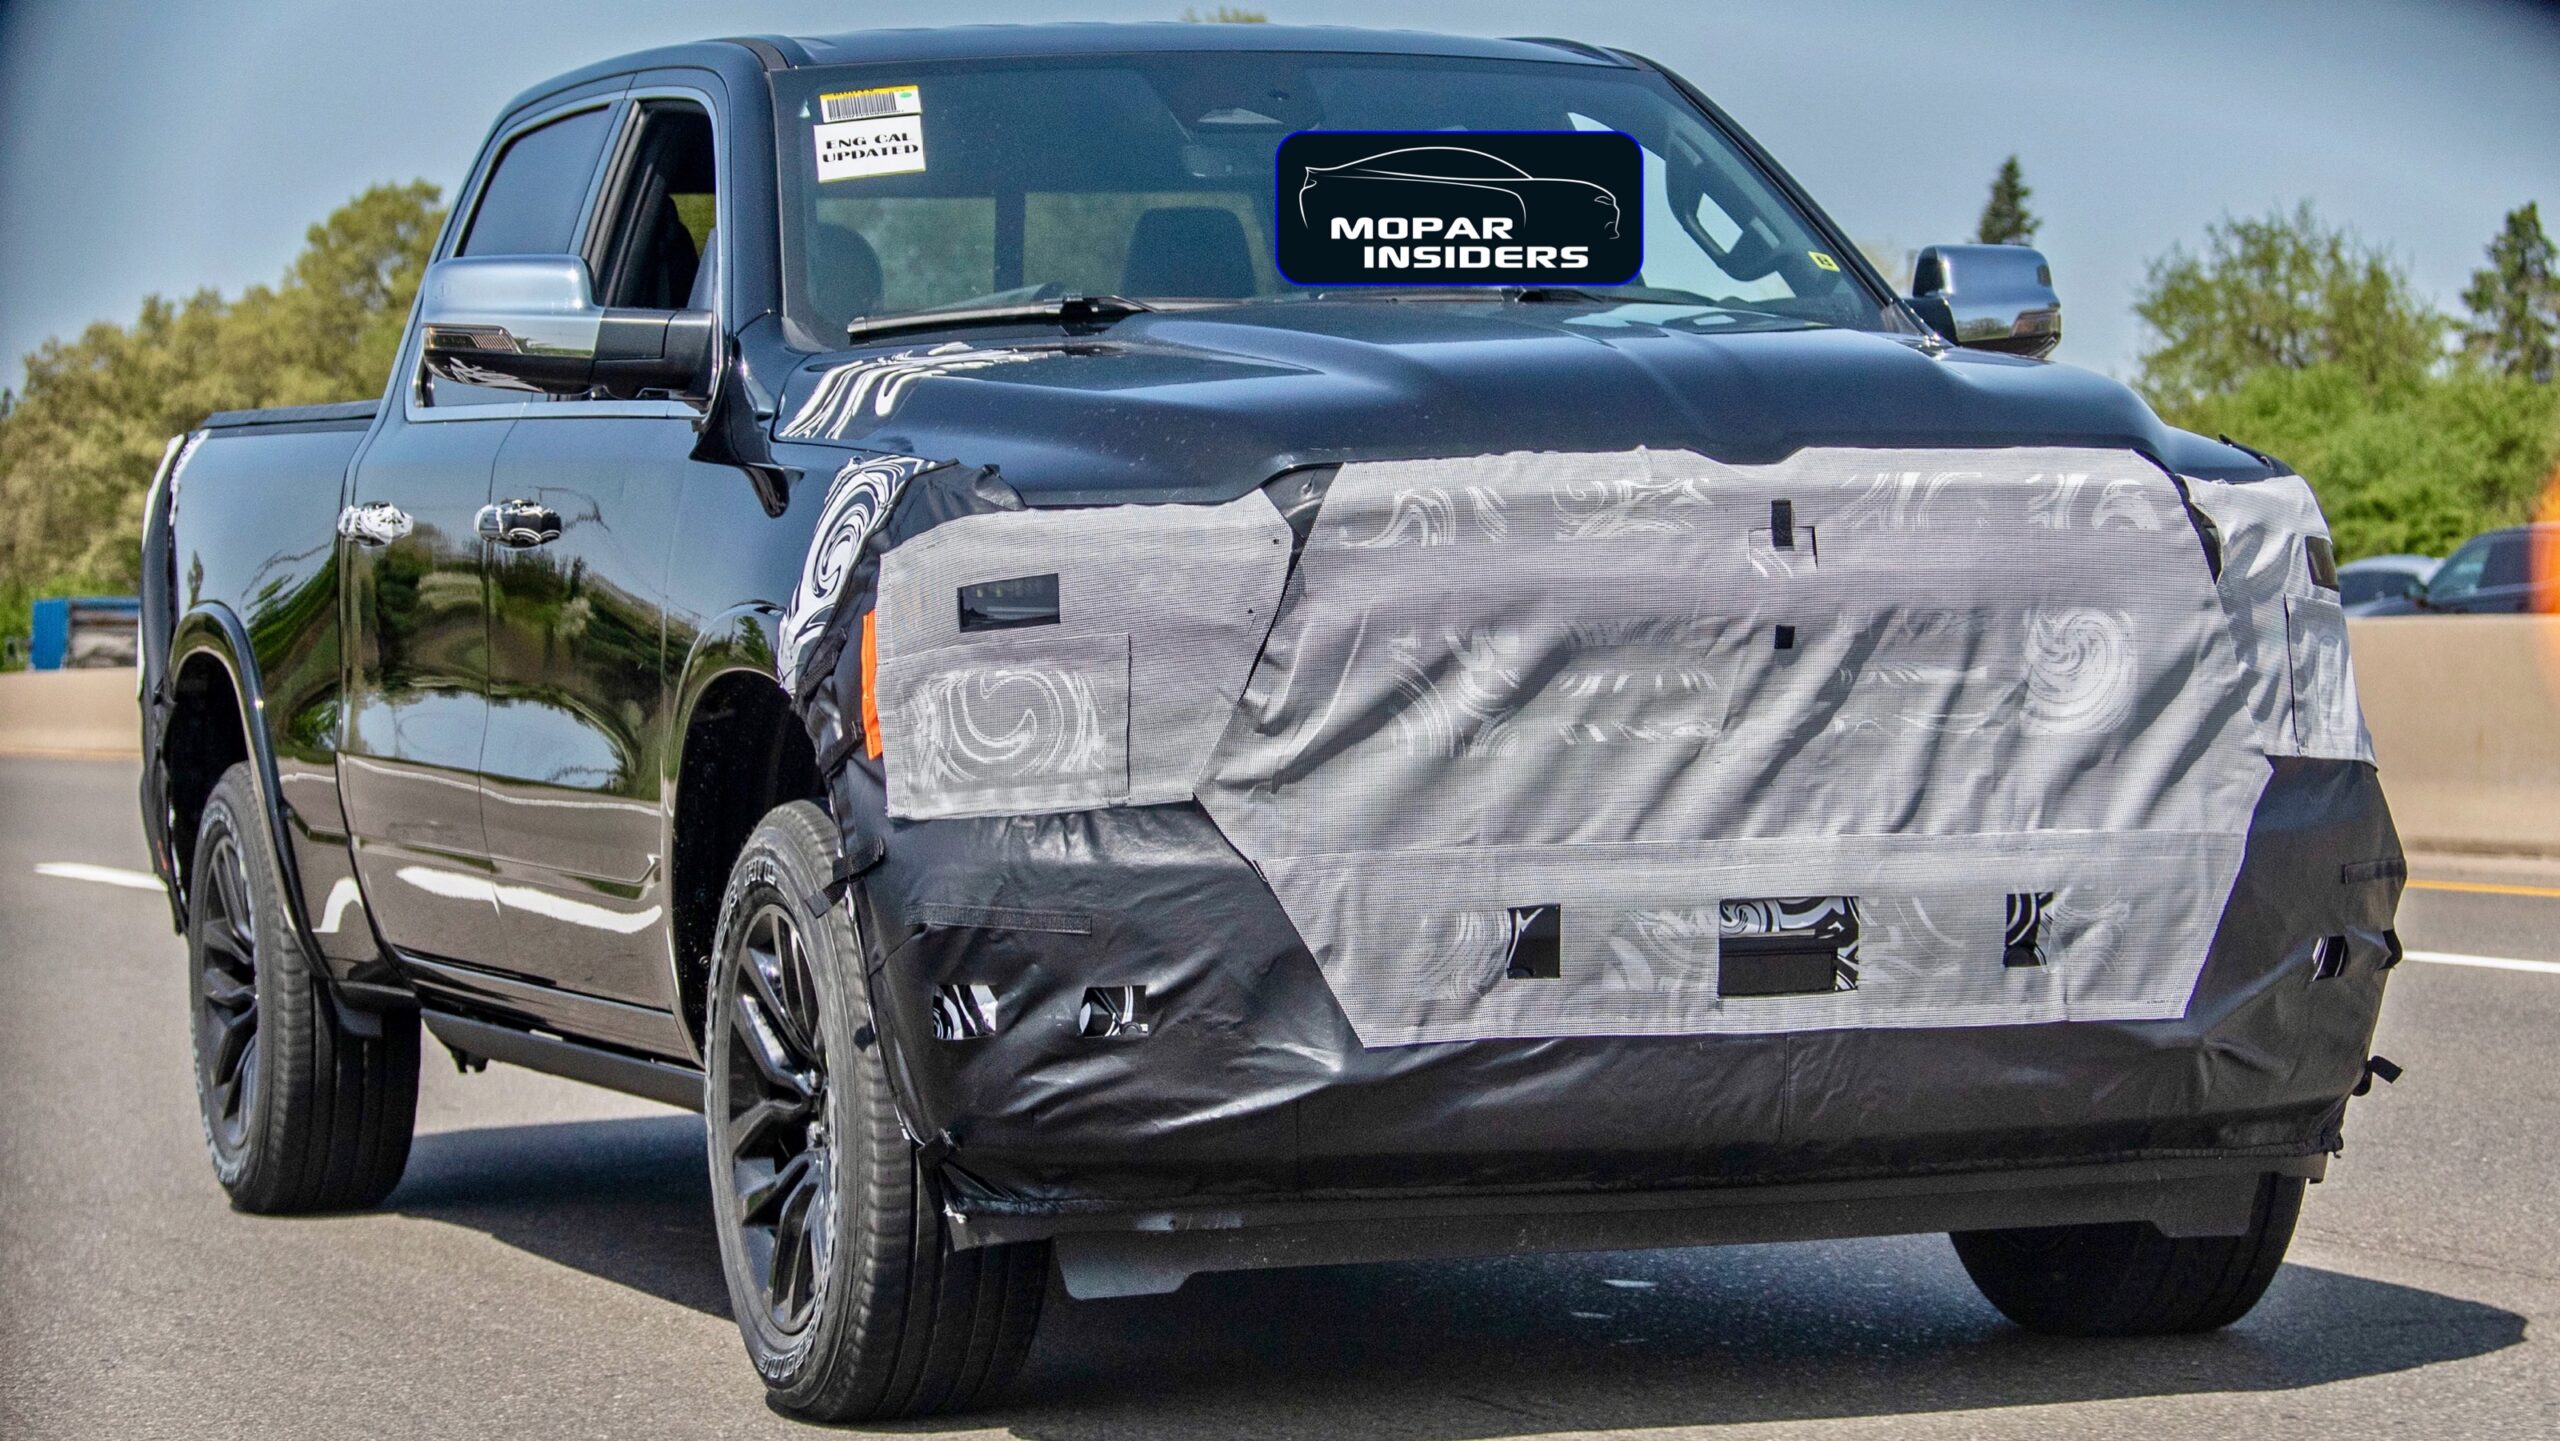 2025 Ram 1500 REV Price, Pictures, Release Date & More